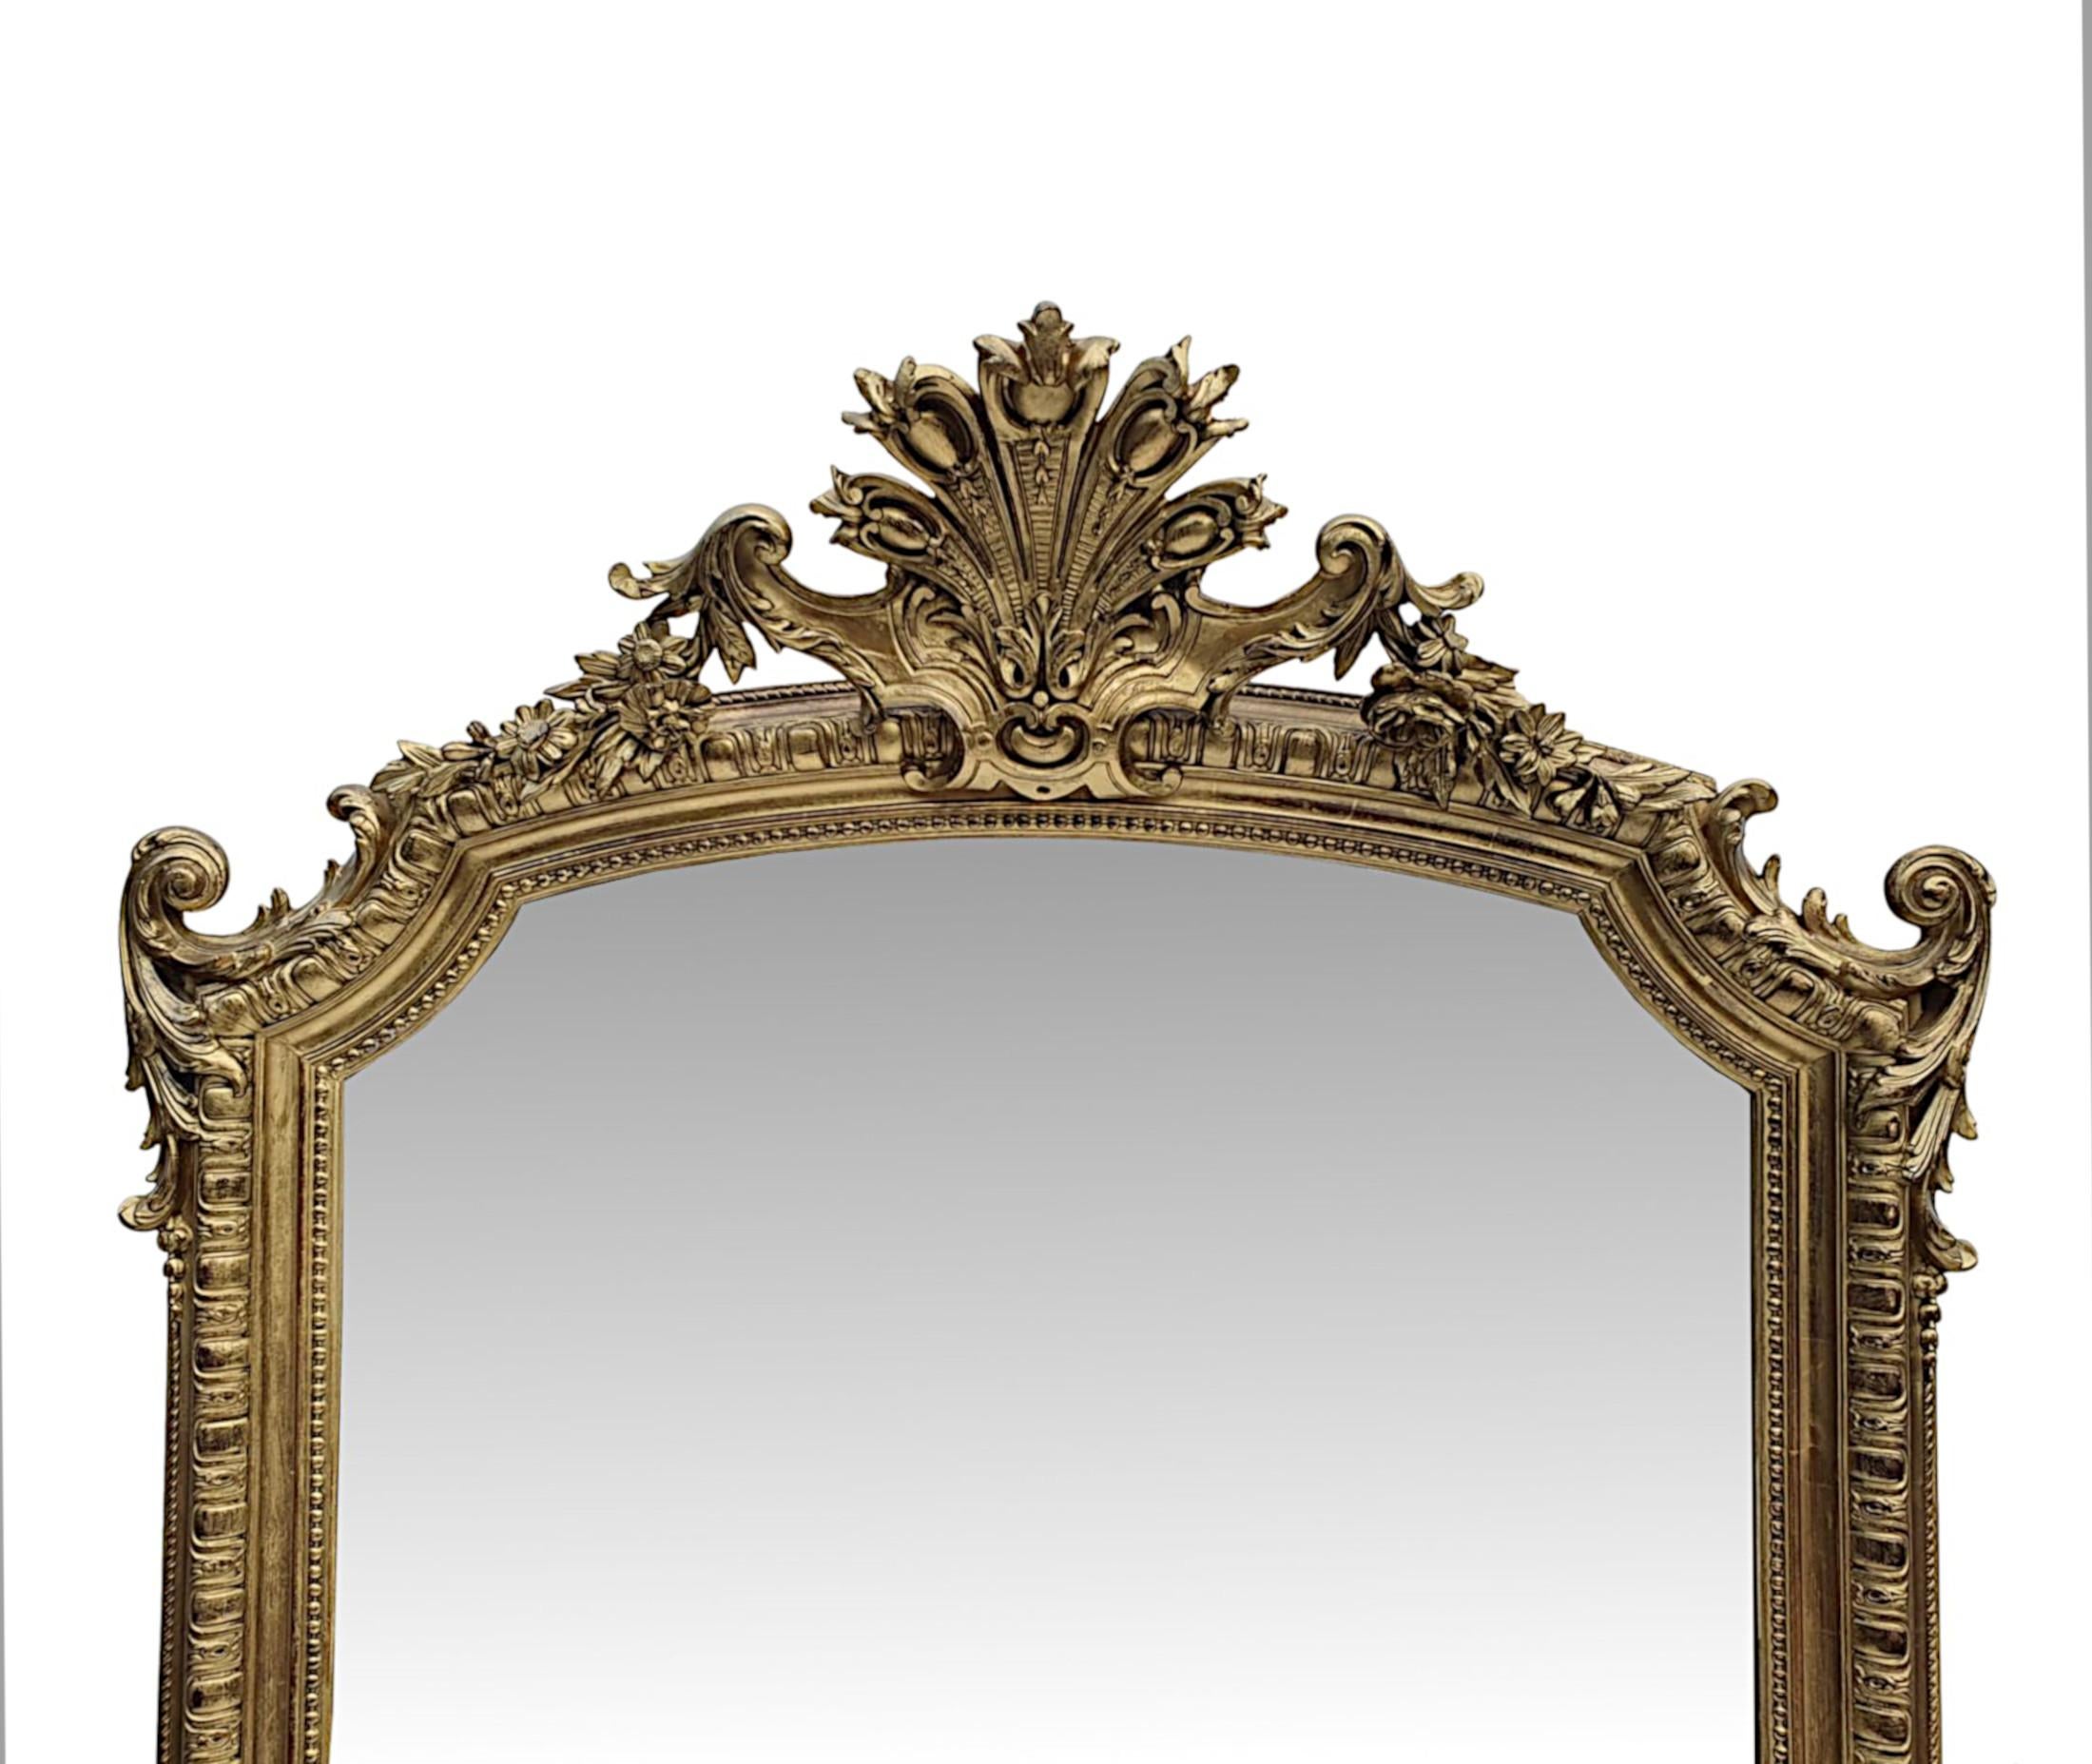 A superb 19th Century giltwood overmantle or hall mirror. The mirror glass plate is set within a beautifully hand carved giltwood frame with lozenge and dart moulding with beaded detail, surmounted with an exquisite cartouche with stylised central